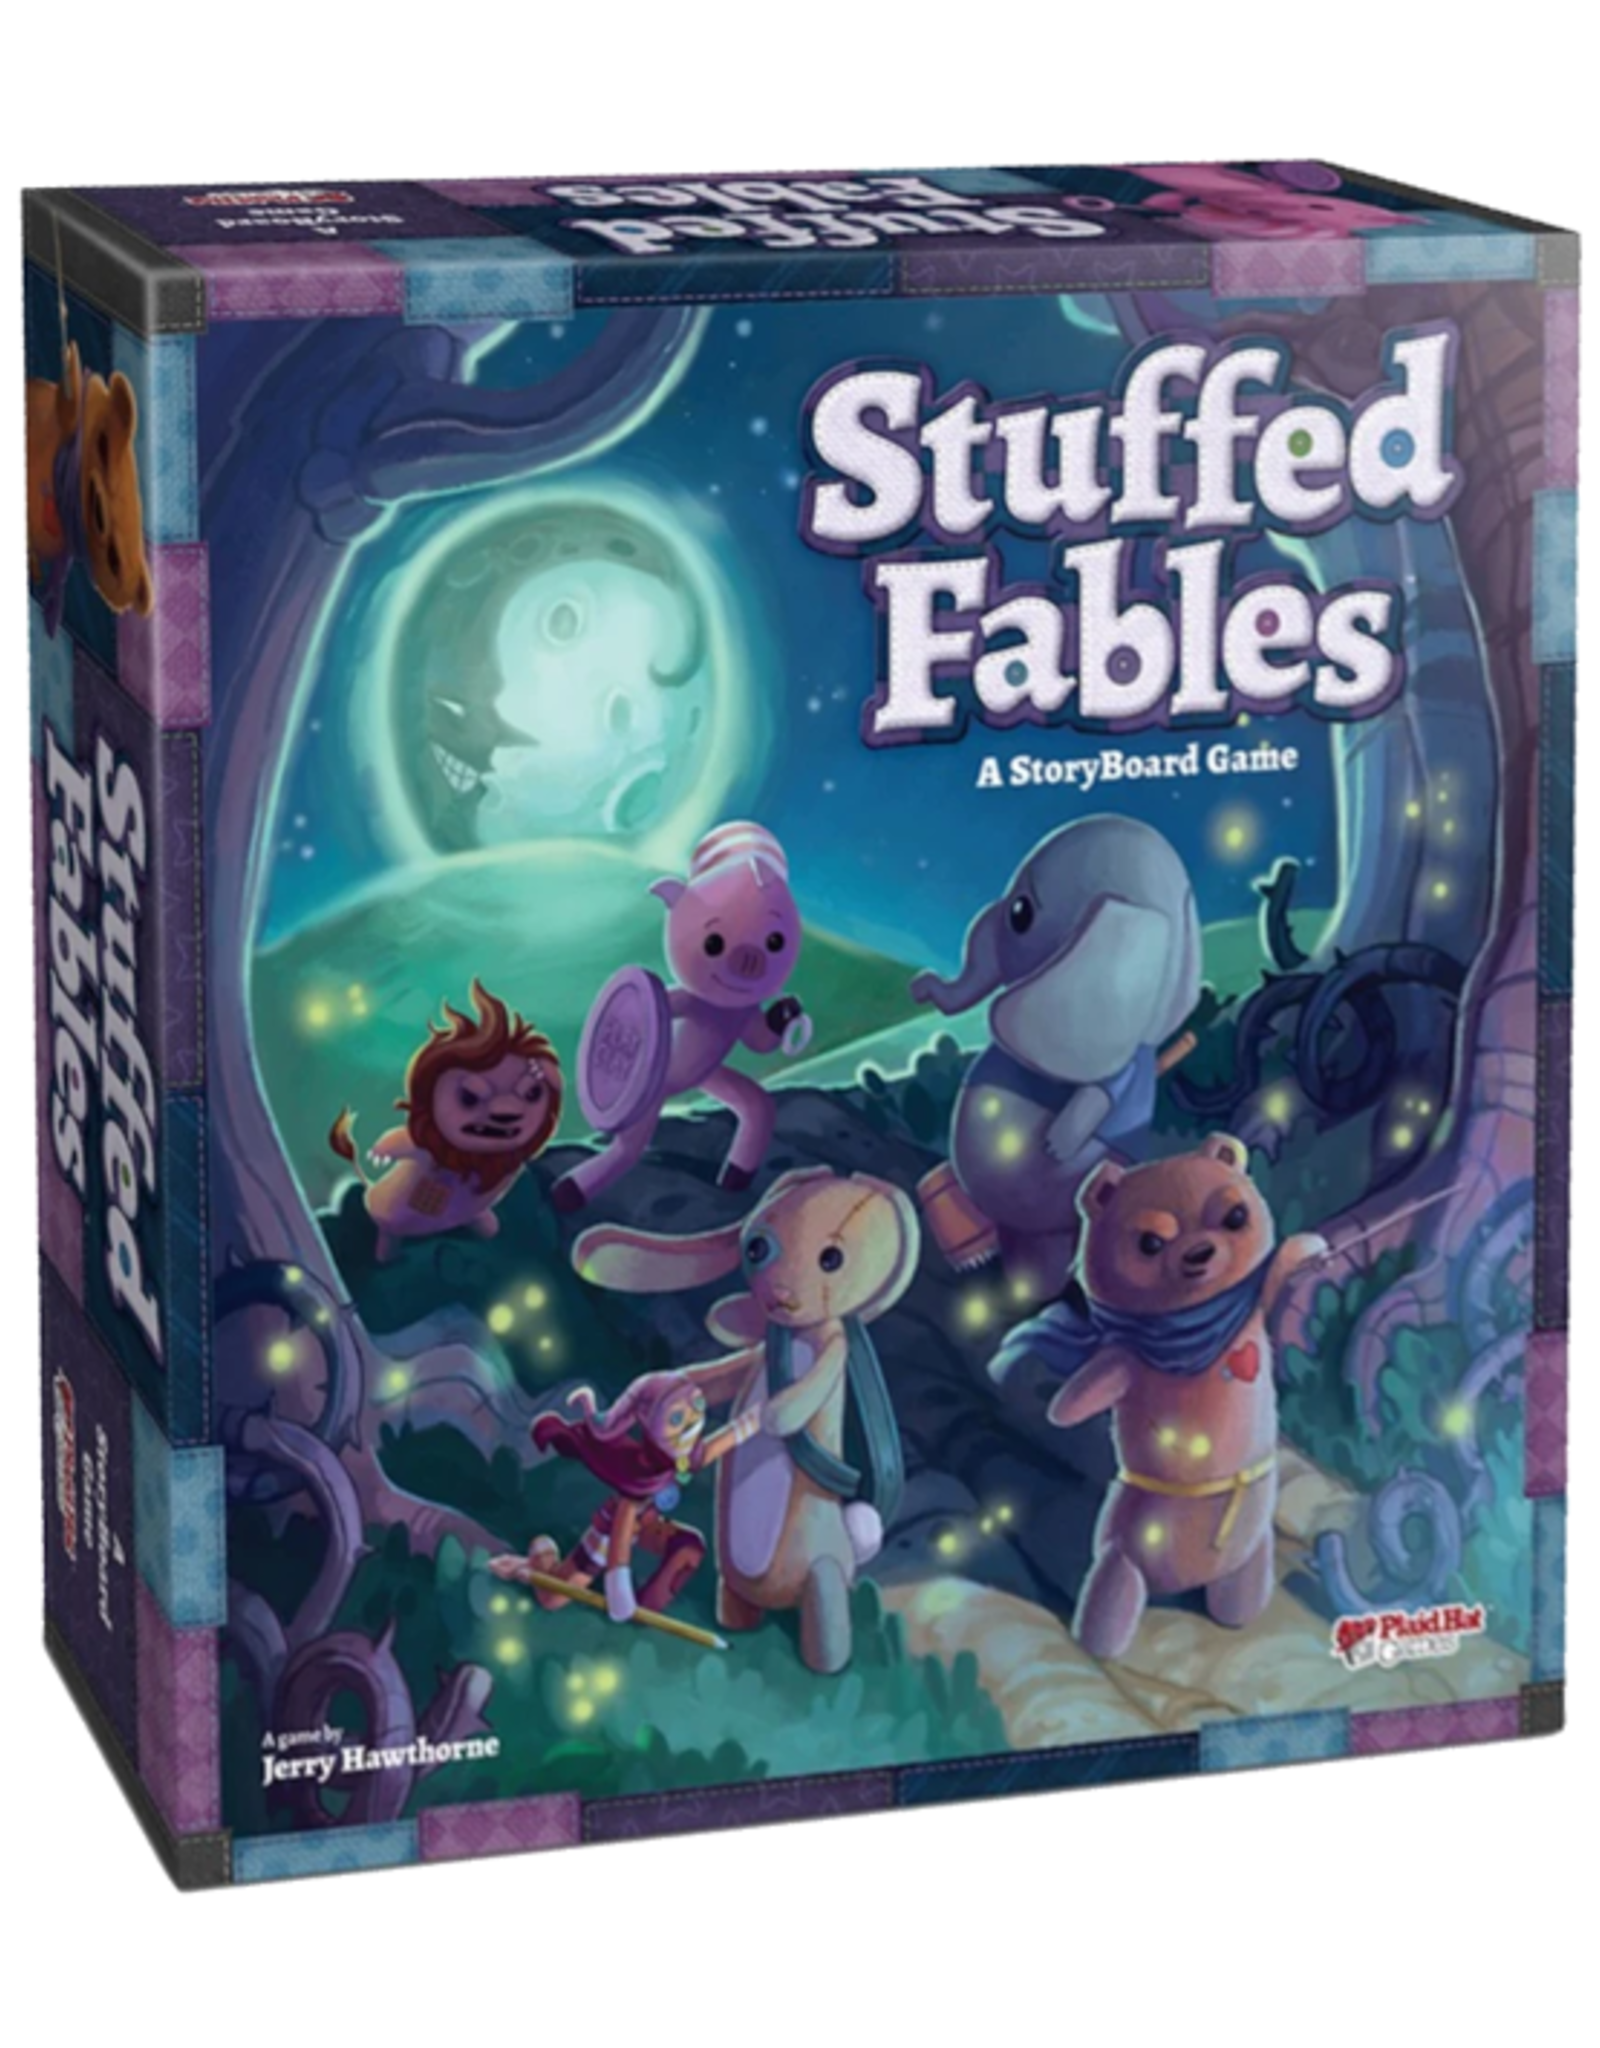 Plaid Hat Games - Stuffed Fables